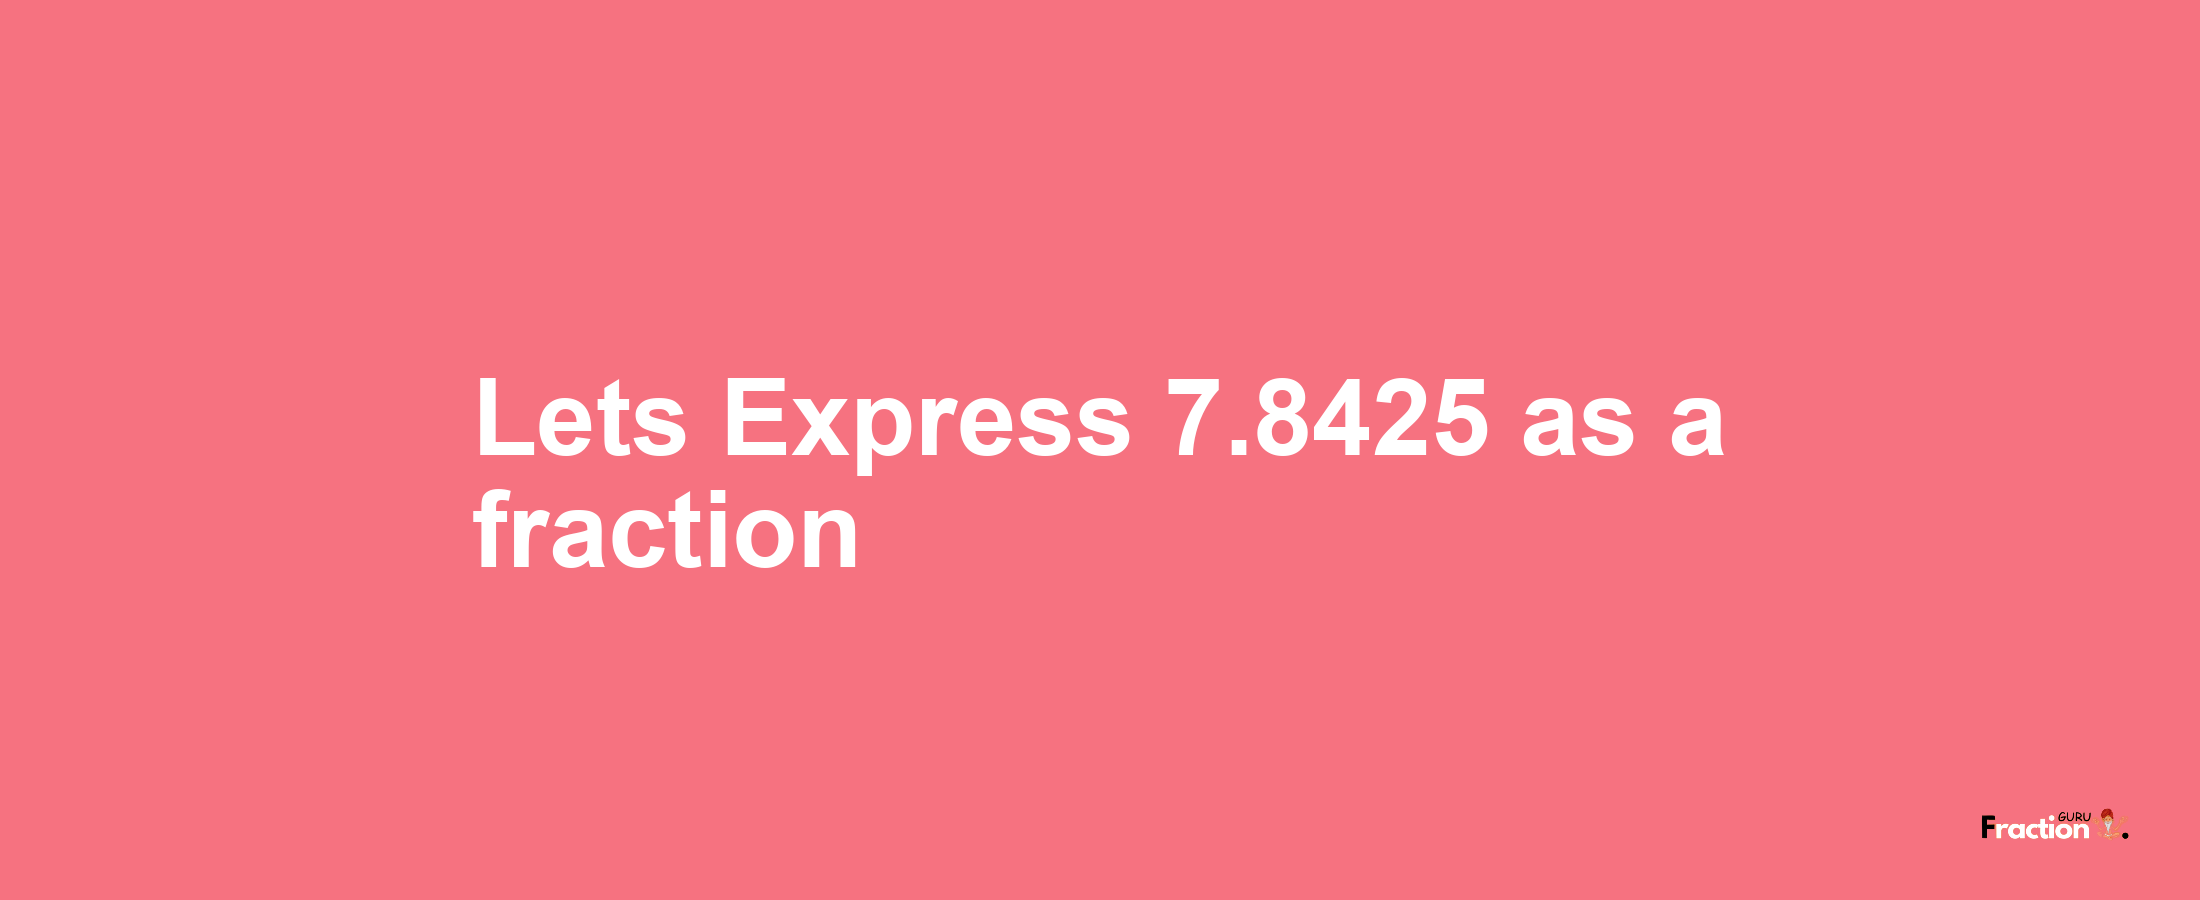 Lets Express 7.8425 as afraction